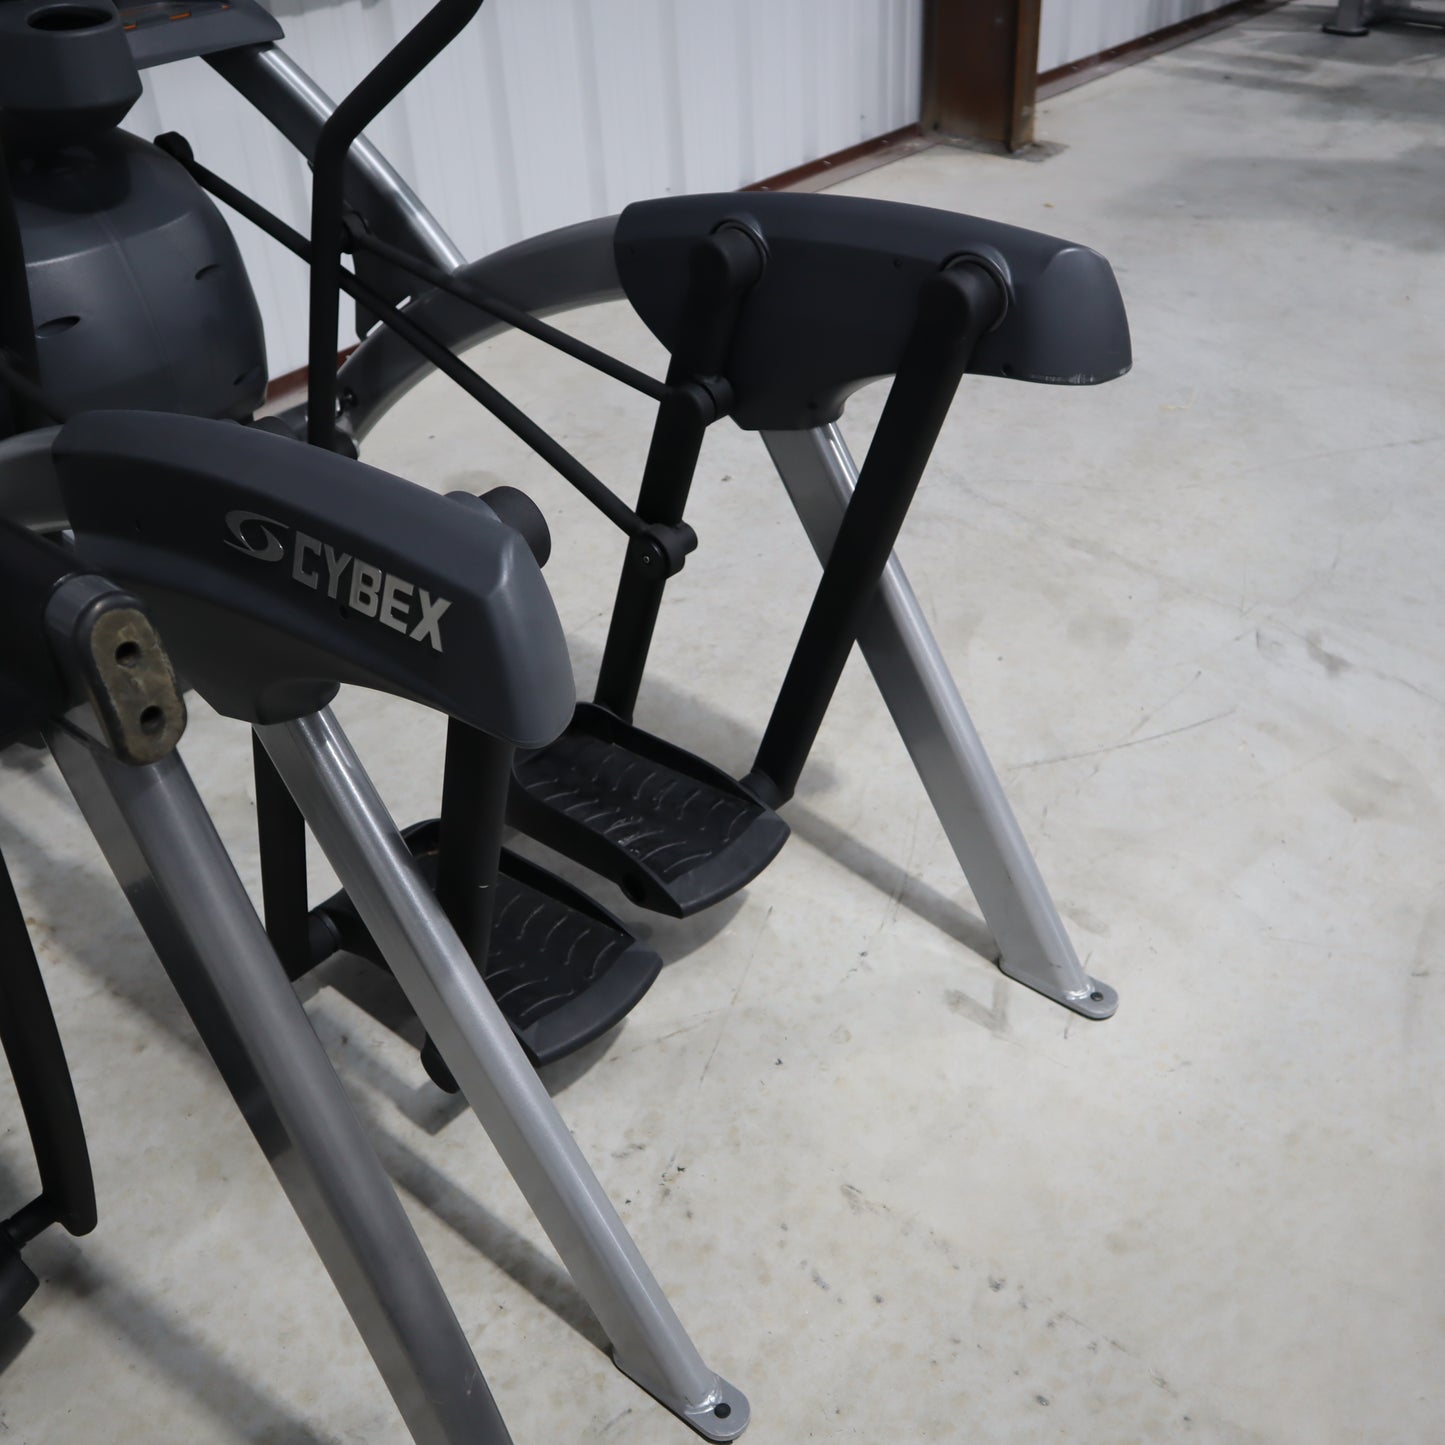 Cybex Arc Trainer Package *One 630A Total Body, One 626AT Total Body* (Used)